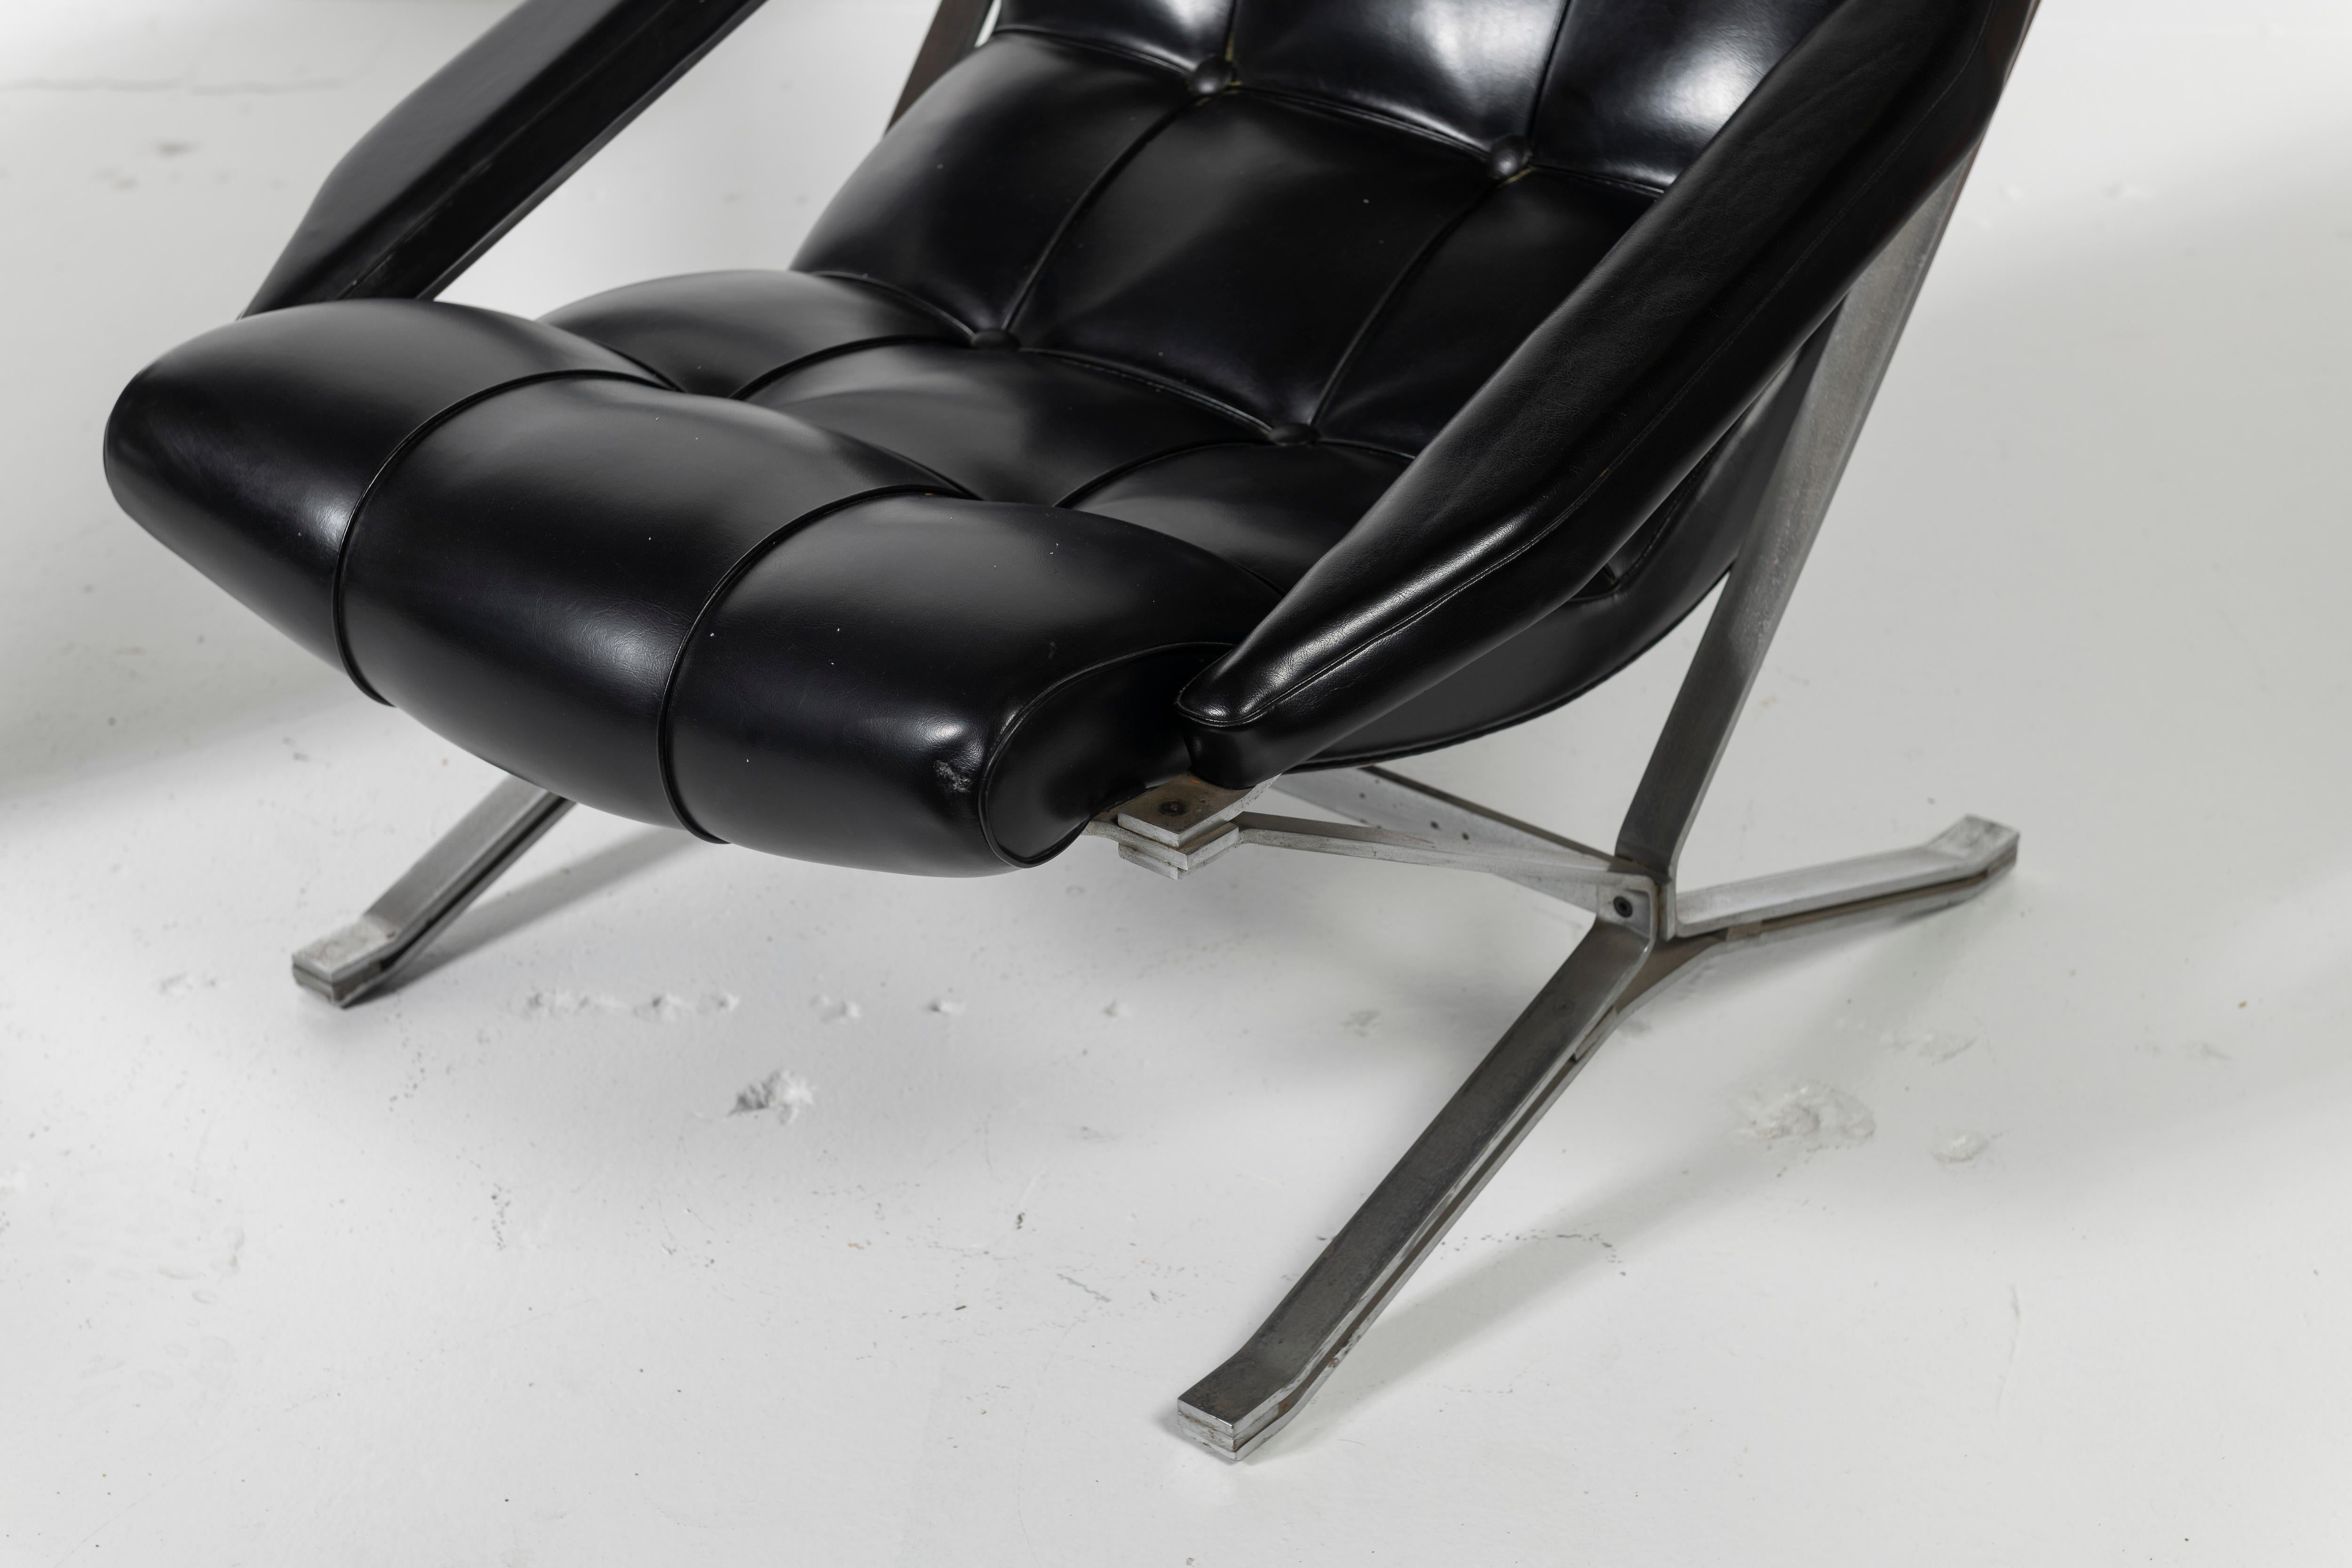 Pair of sleek, padded armchairs by Giulio Moscatelli for Formanova, 1970s, have chromed steel X-shaped supports and original faux leather upholstery. The chairs are structurally sound, though the cushions need to be replaced and the chrome could